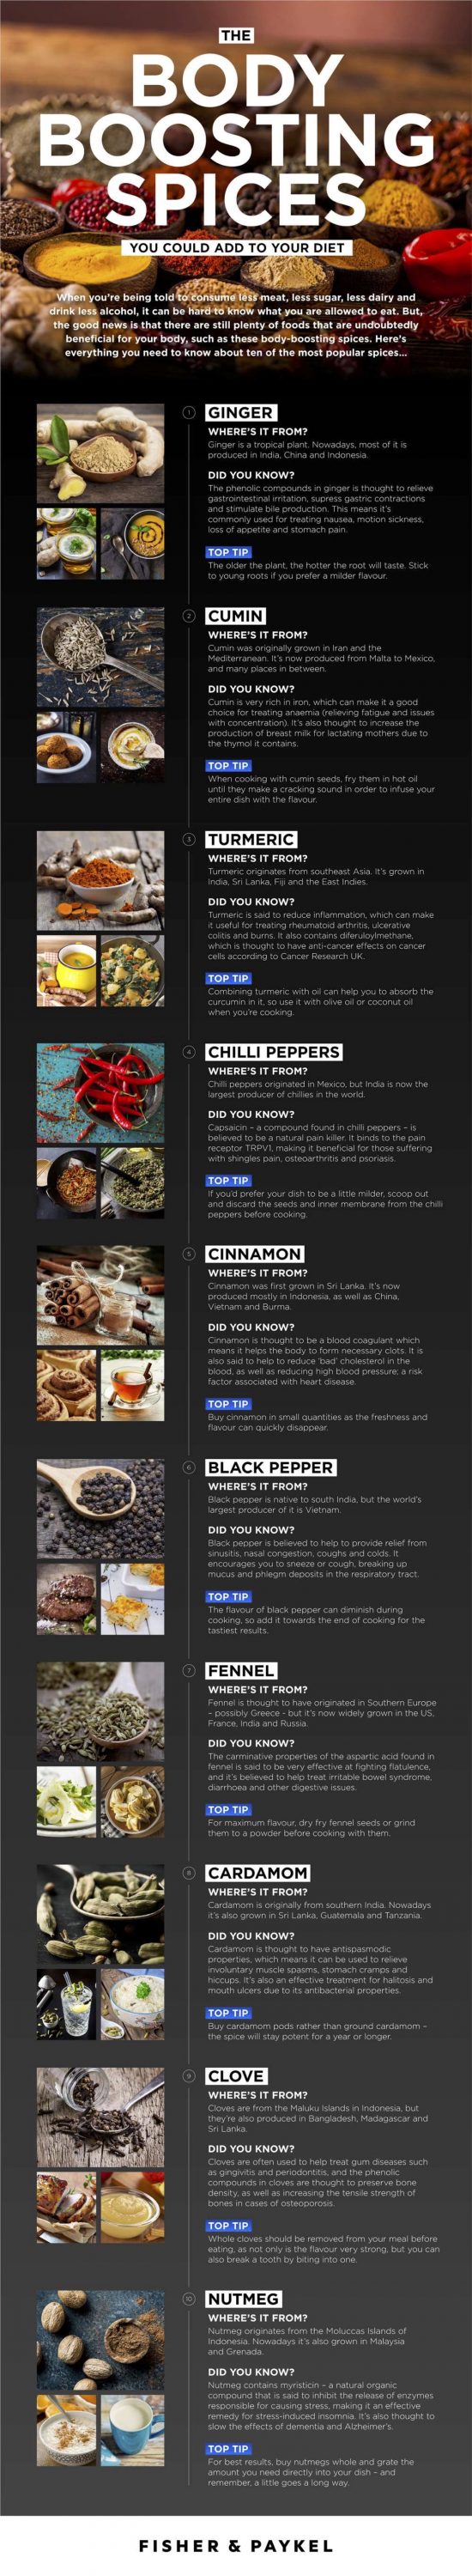 Fisher Paykel Body Boosting Spices Infographic The Body Boosting Spices you could add to your Diet - 2